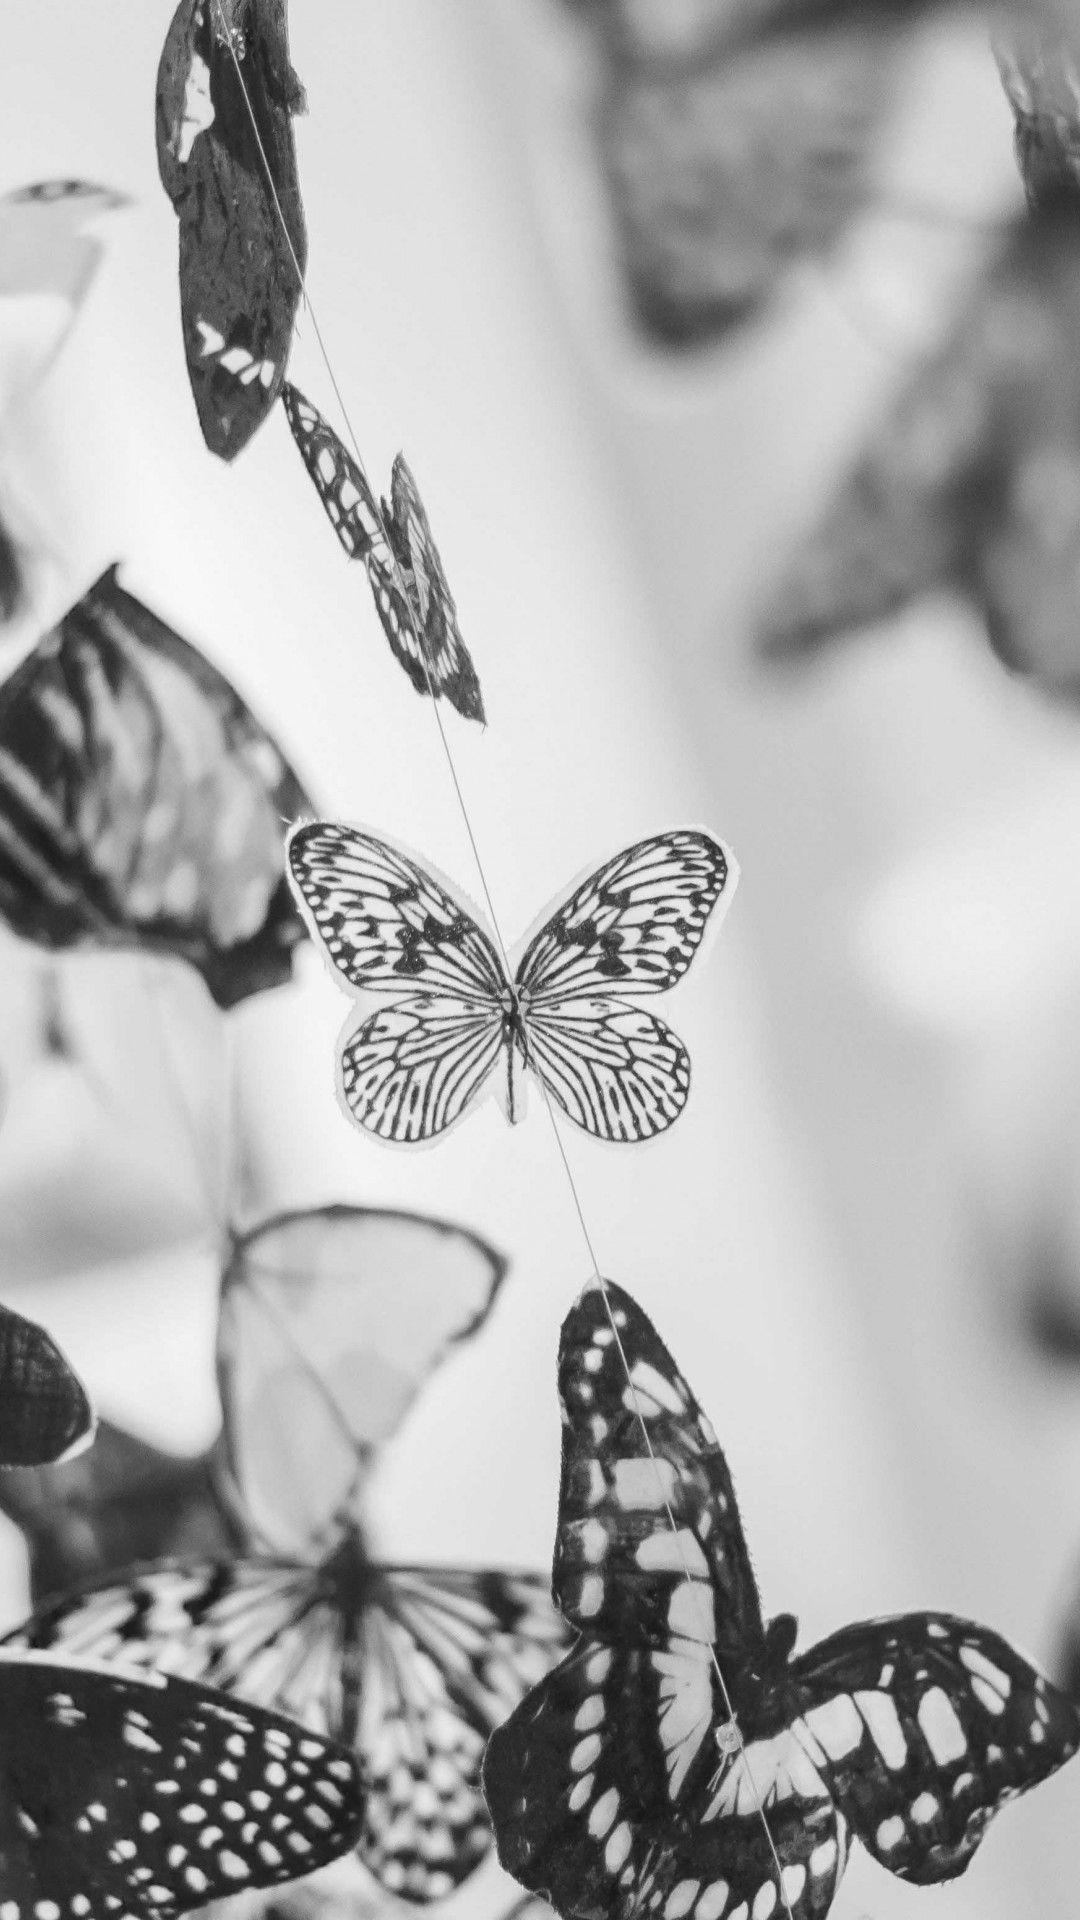 Black and White Butterfly Wallpapers - Top Free Black and White